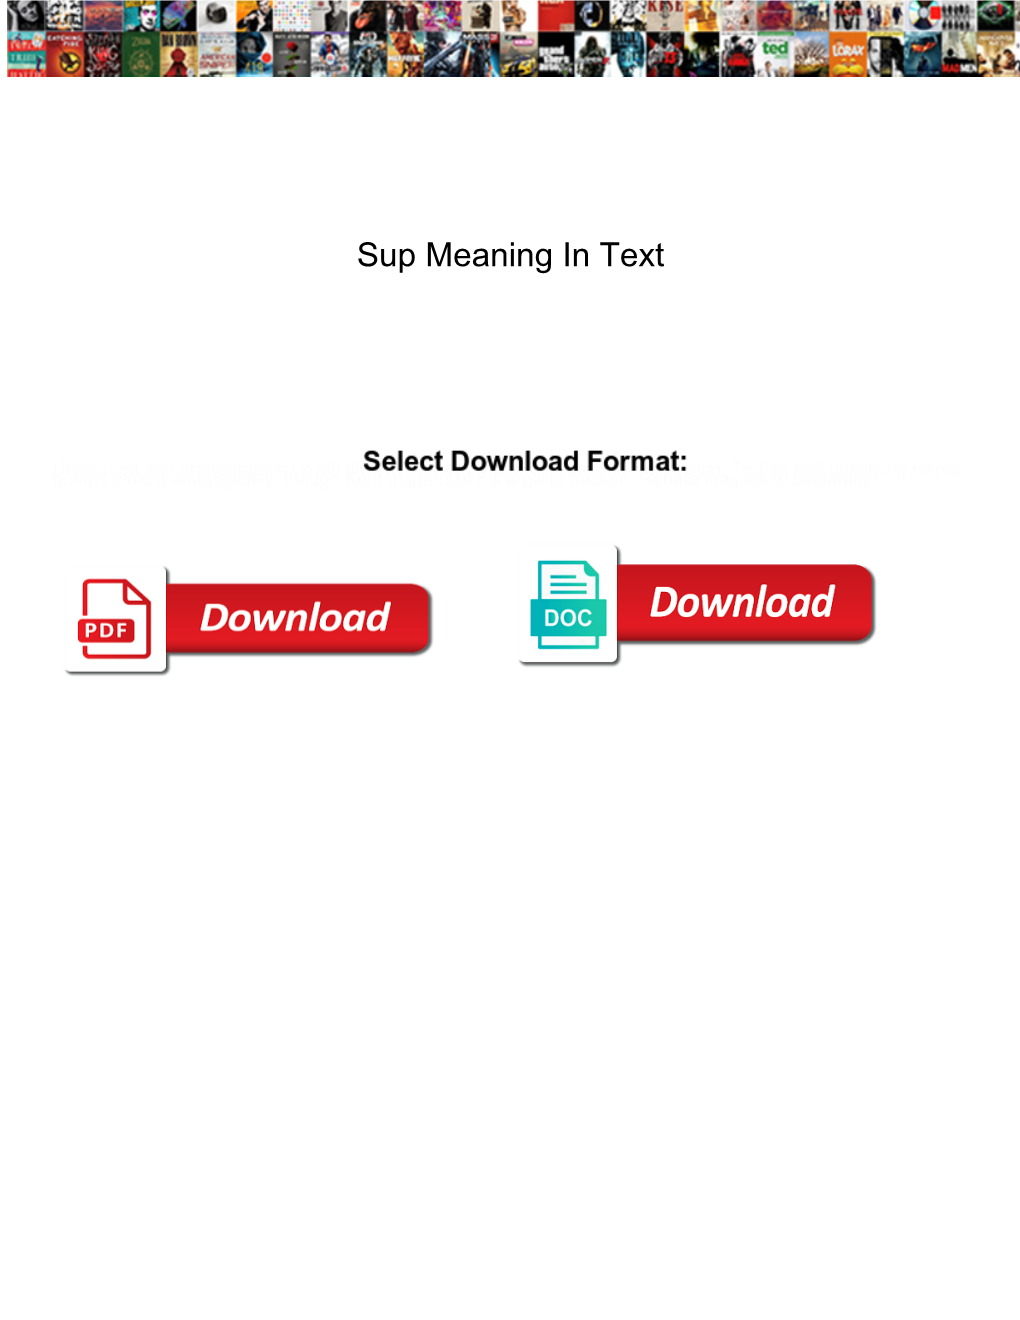 Sup Meaning in Text